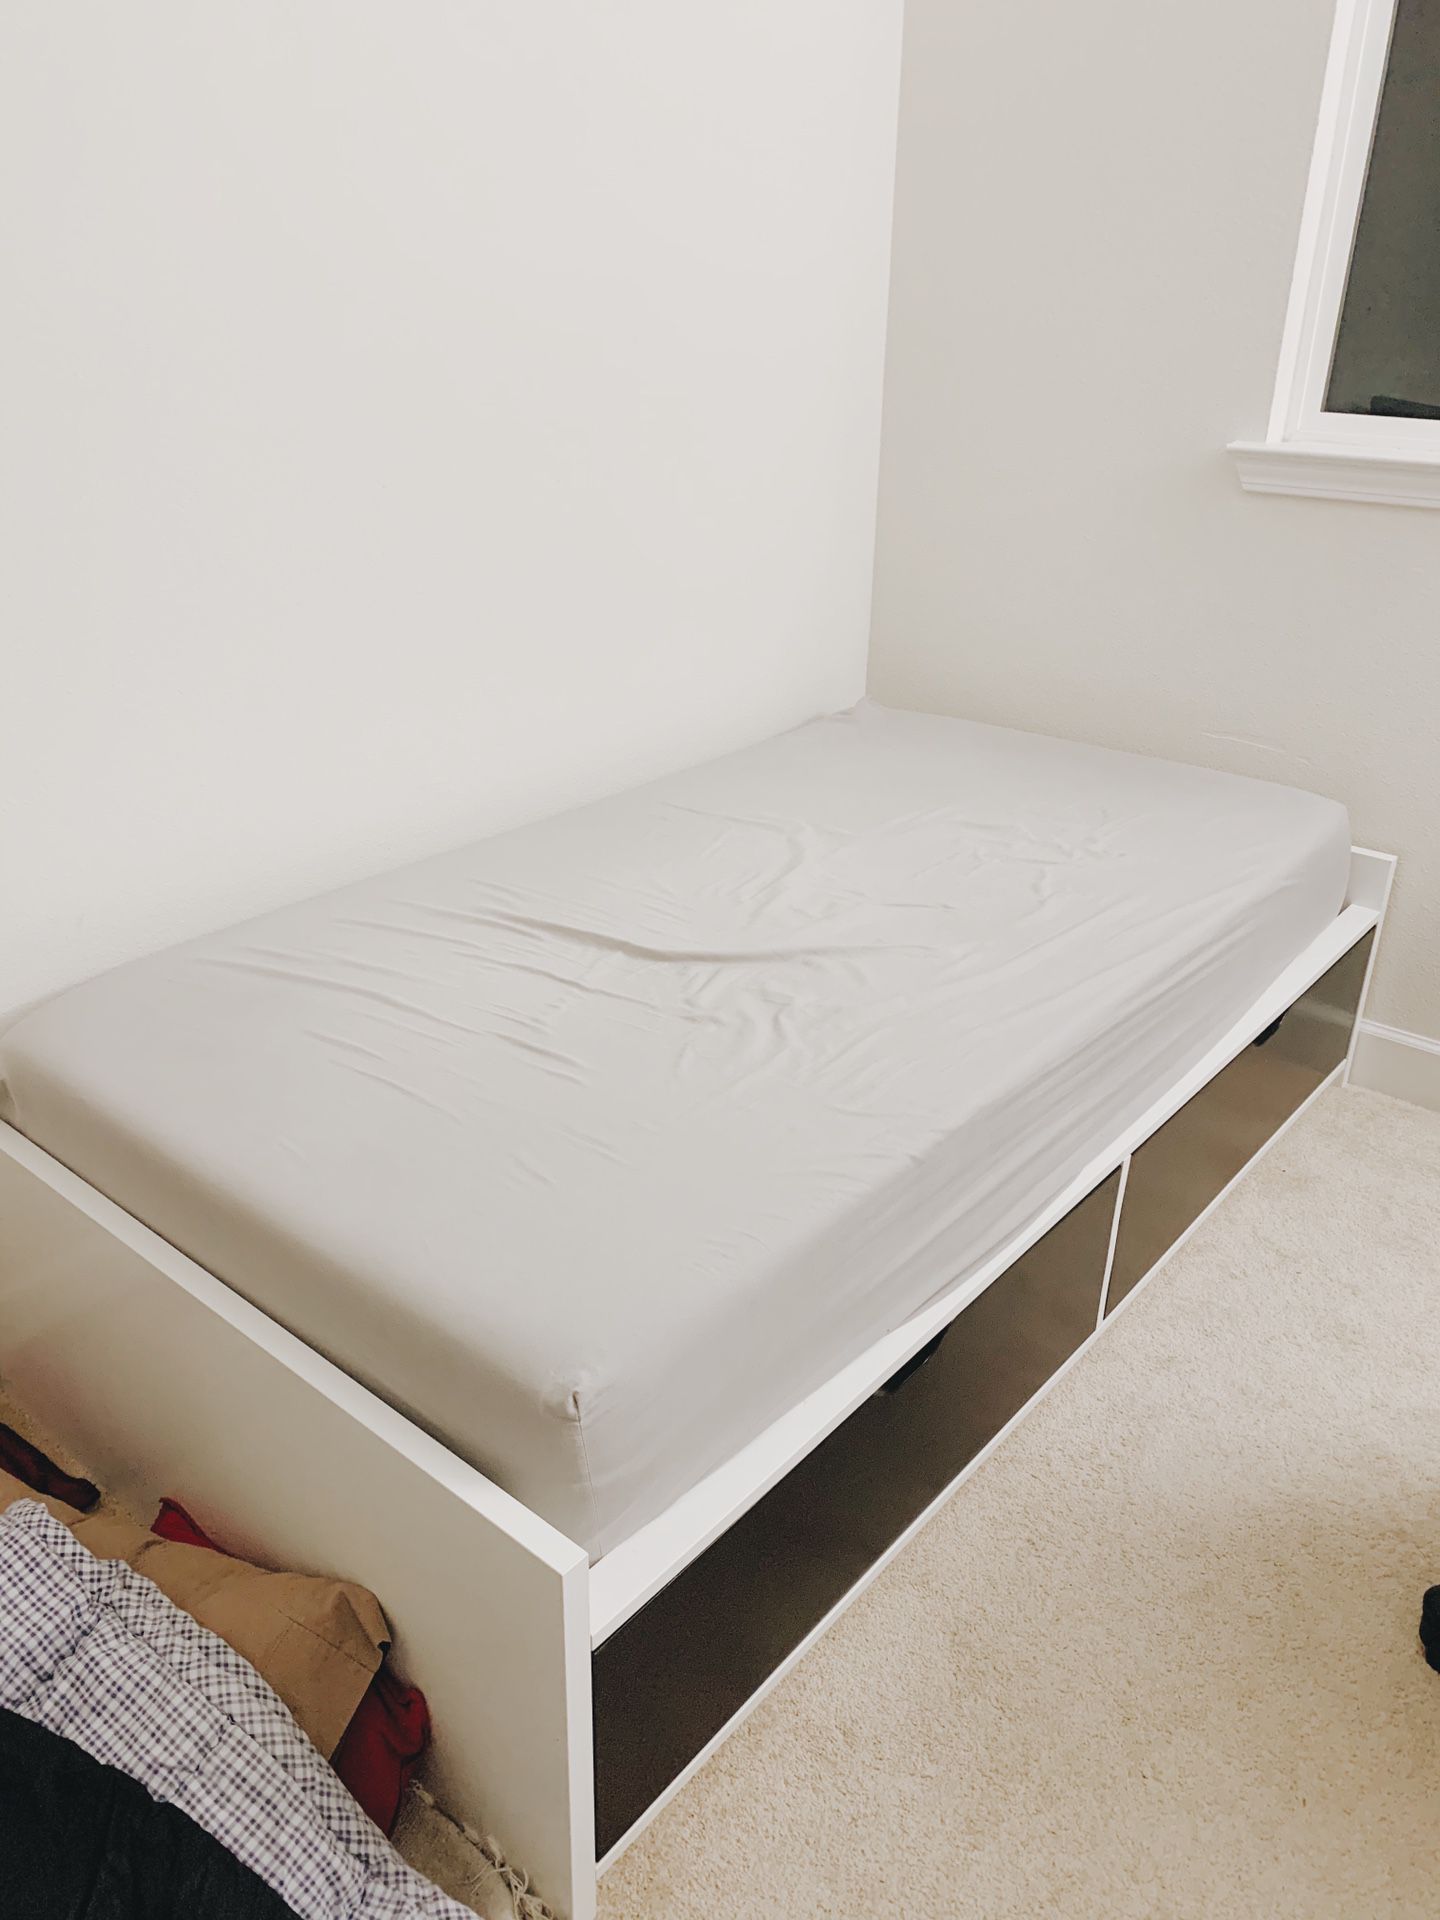 IKEA bed frame and tuft & needle mattress